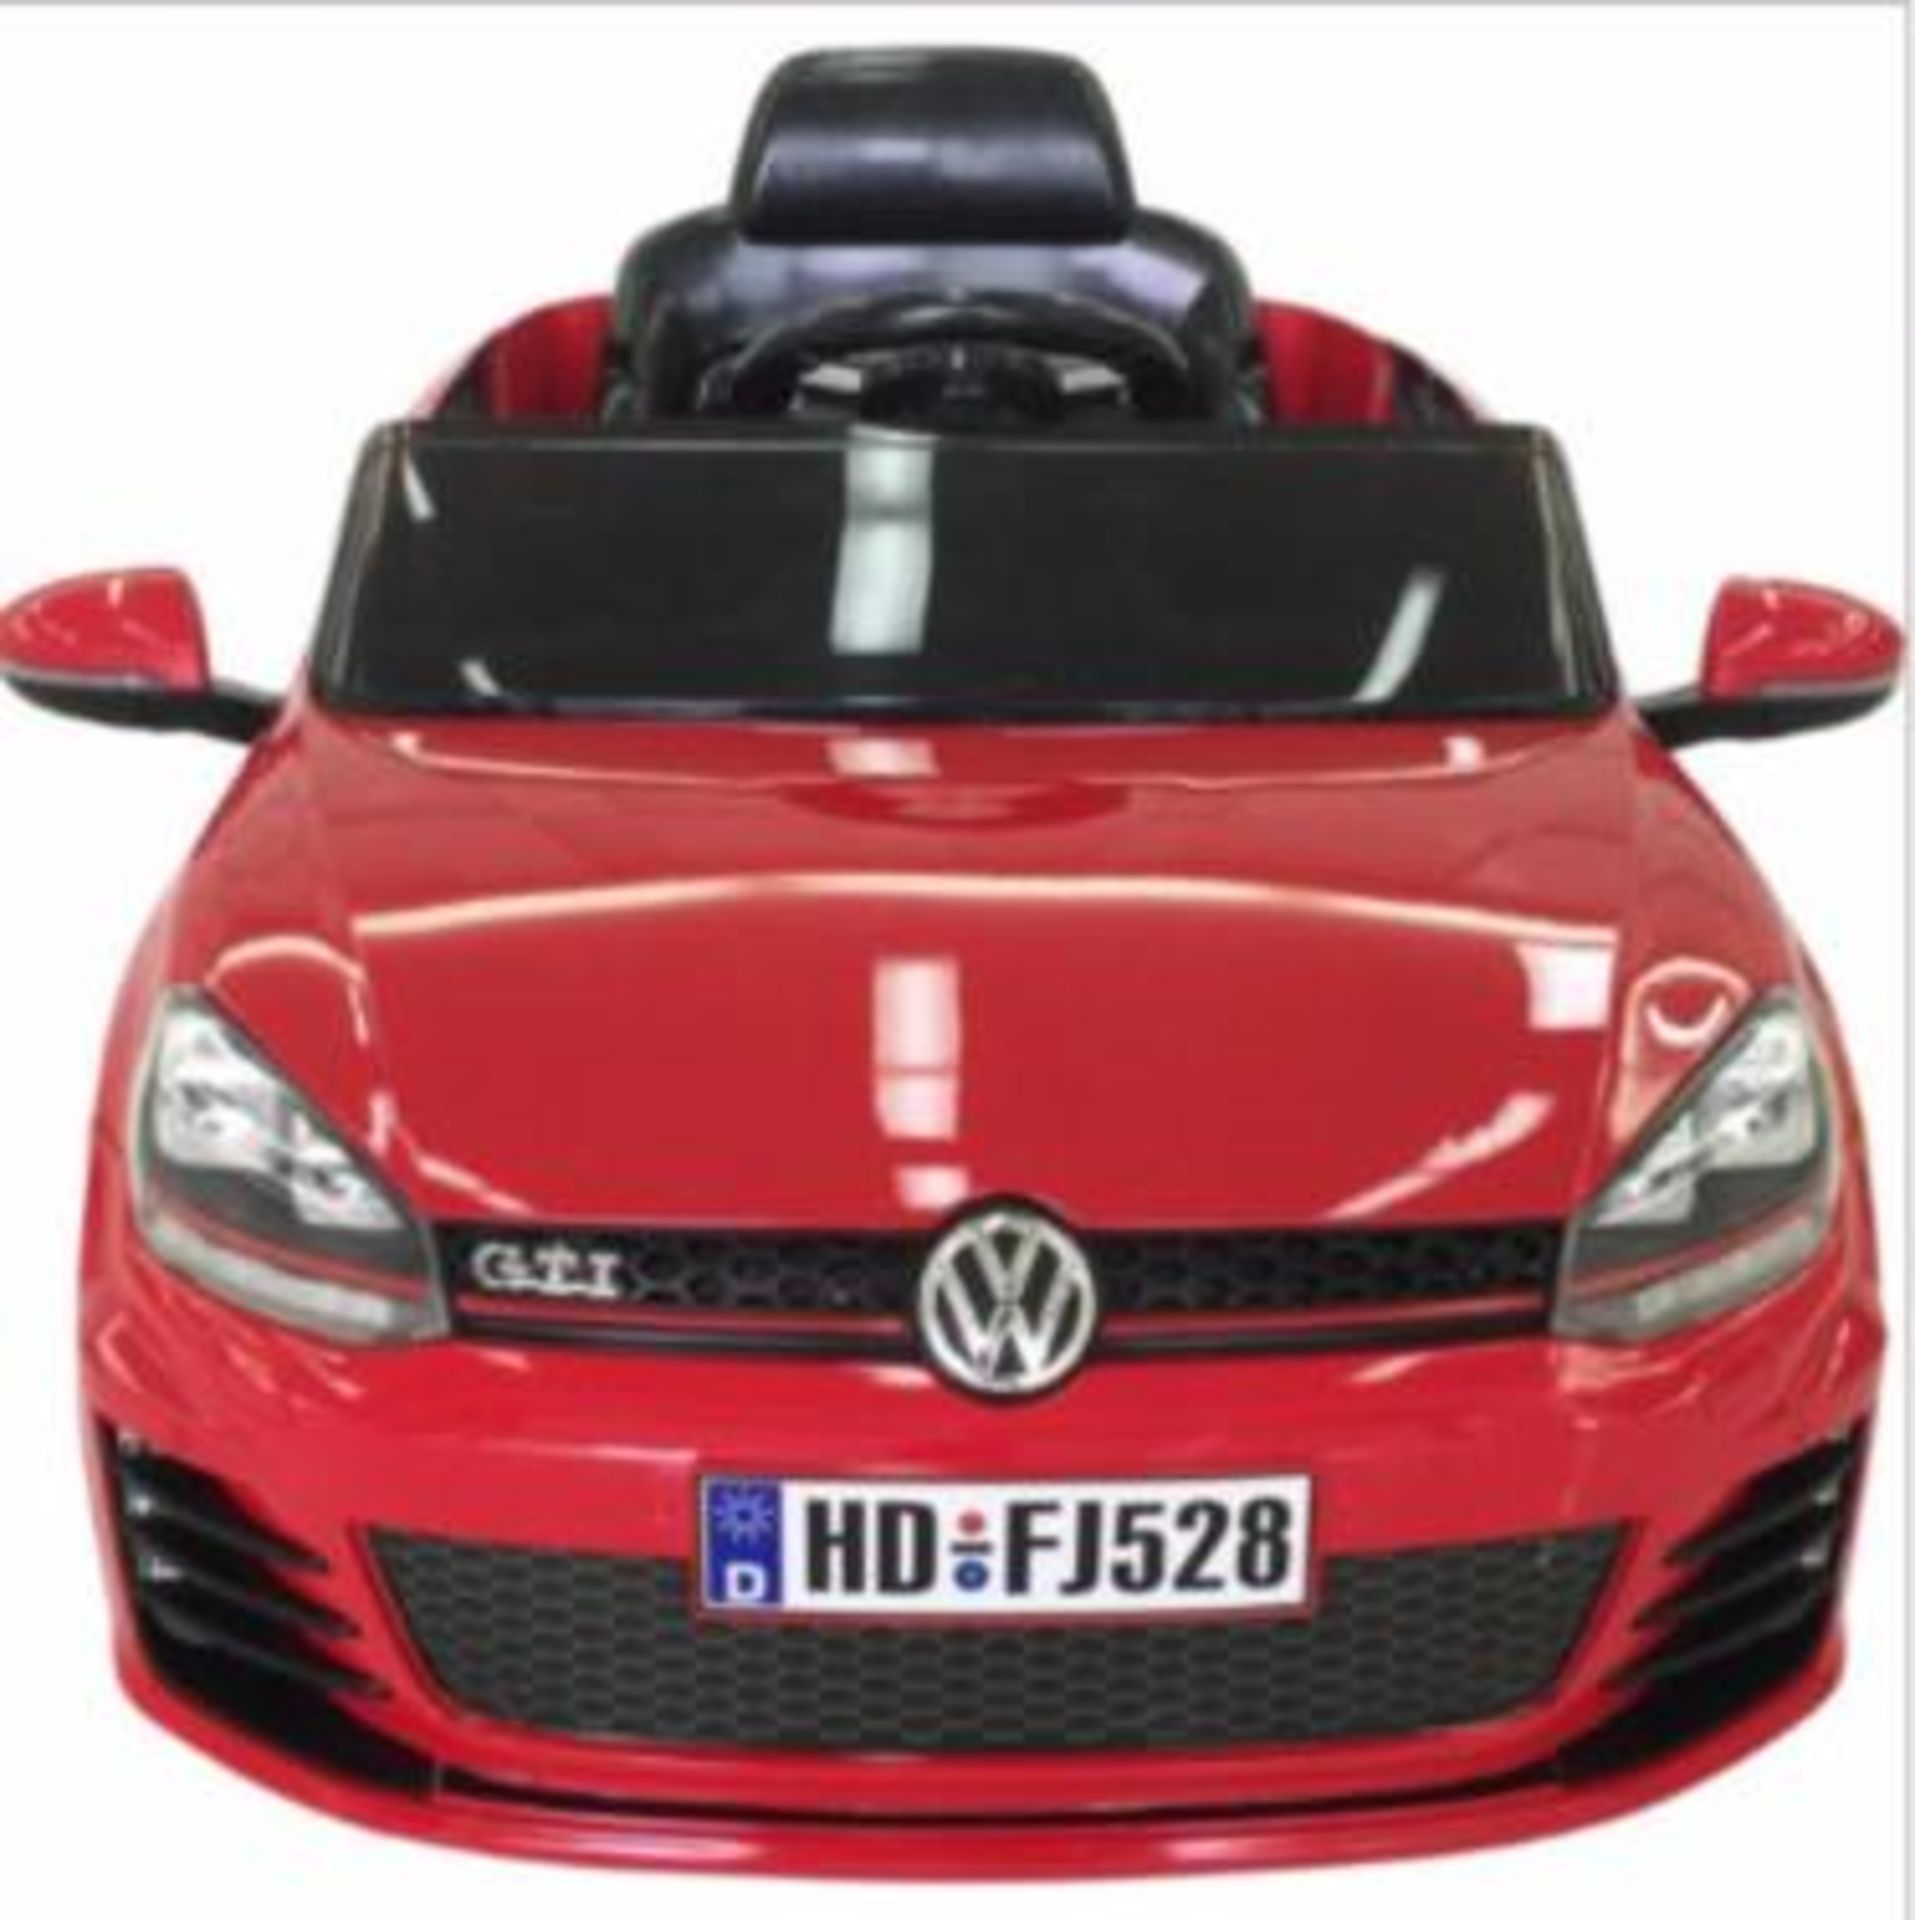 V Brand New Ride In Golf GTi VW Licensed 1:4 Scale Design With 2.4G One-2-One Code Remote Control-